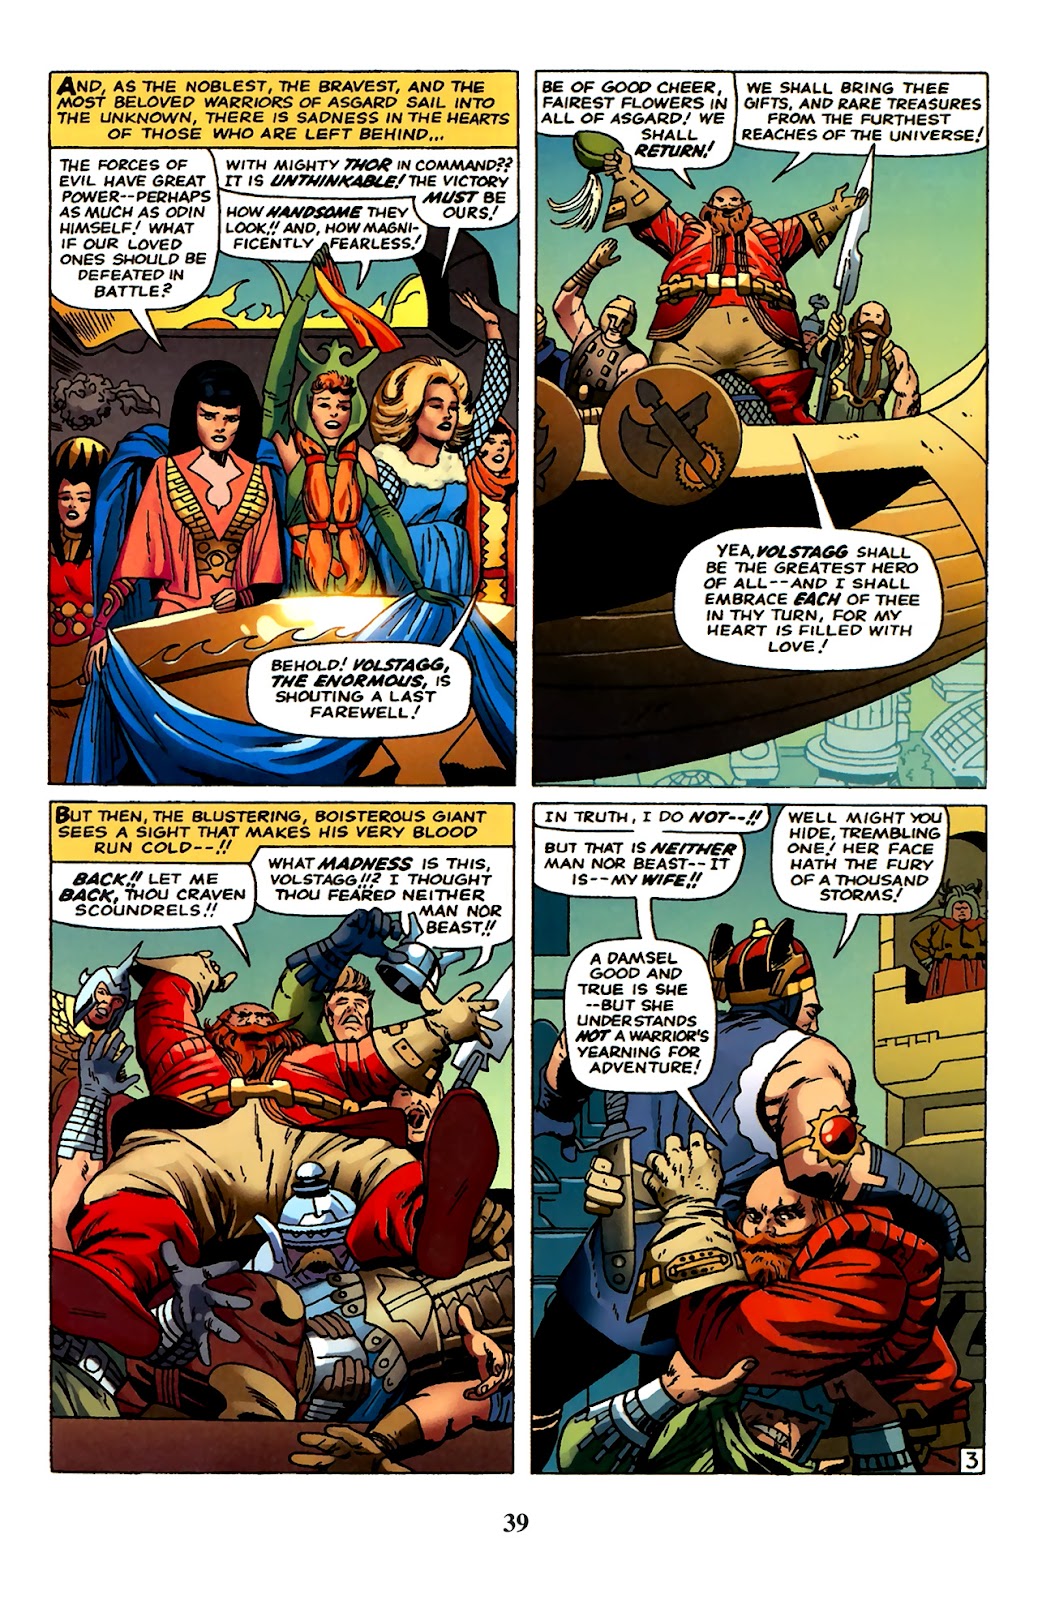 Thor: Tales of Asgard by Stan Lee & Jack Kirby issue 3 - Page 41